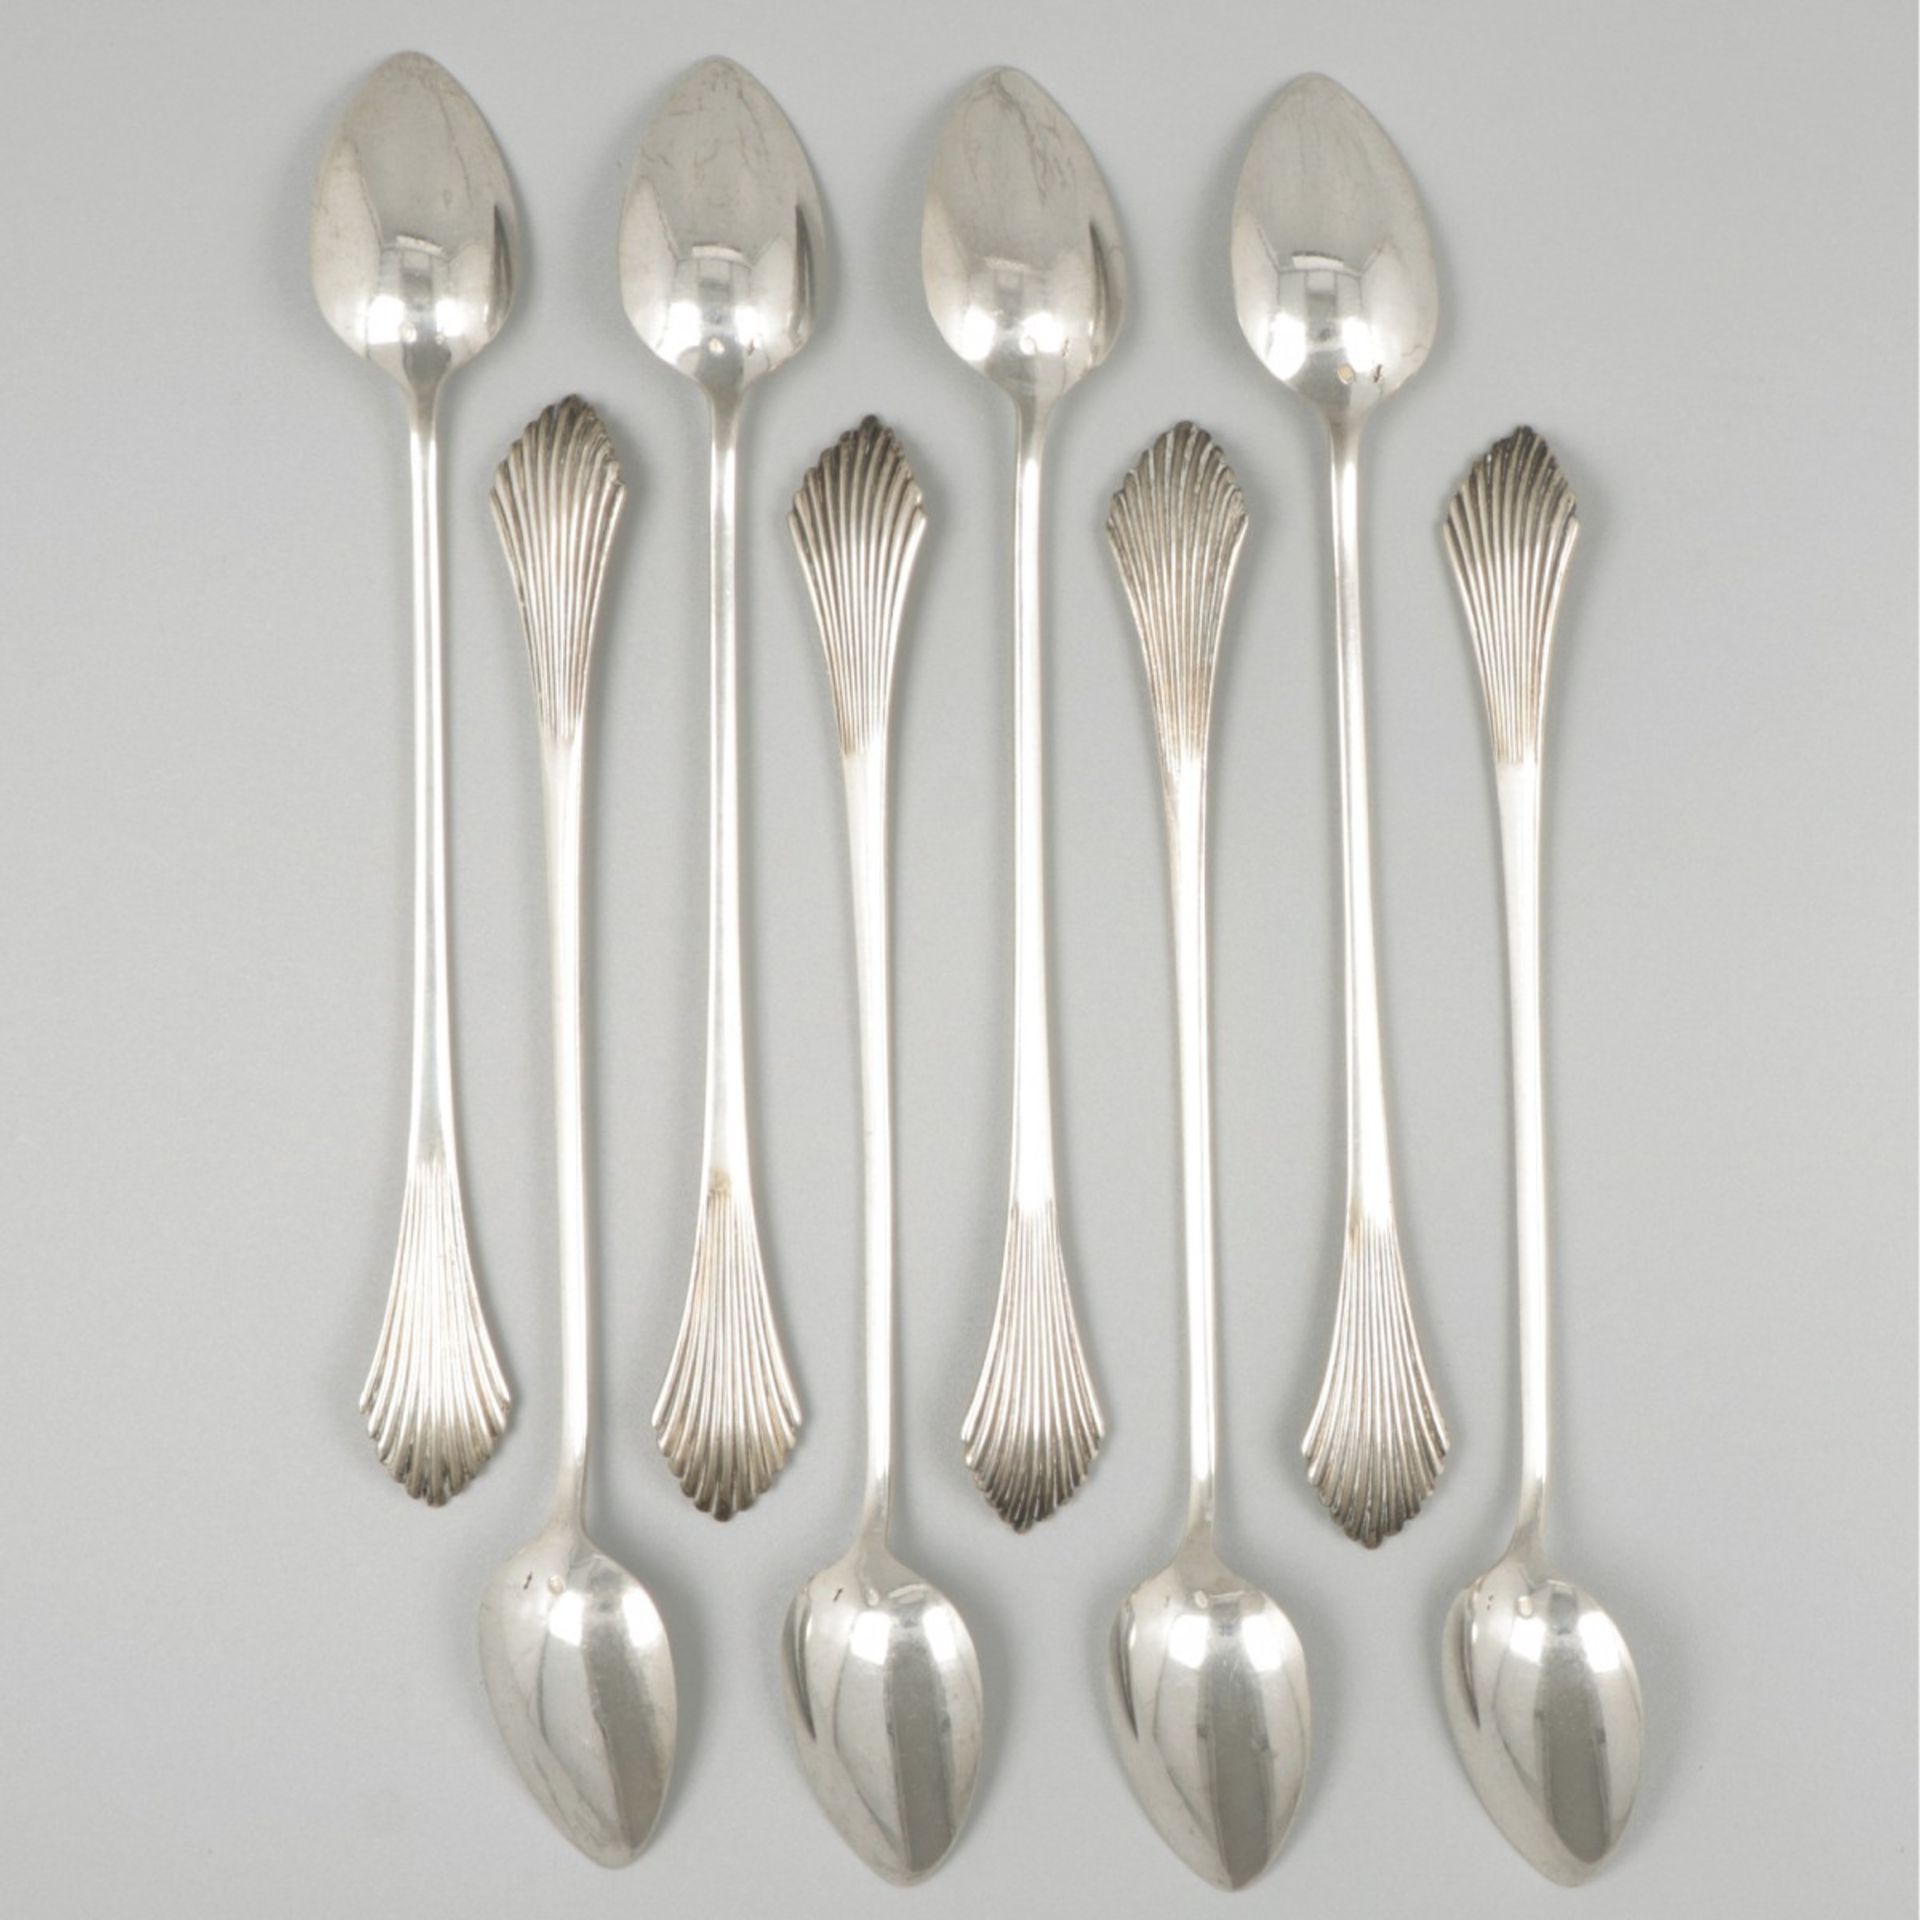 8-piece set of ice cream spoons silver. - Image 2 of 6